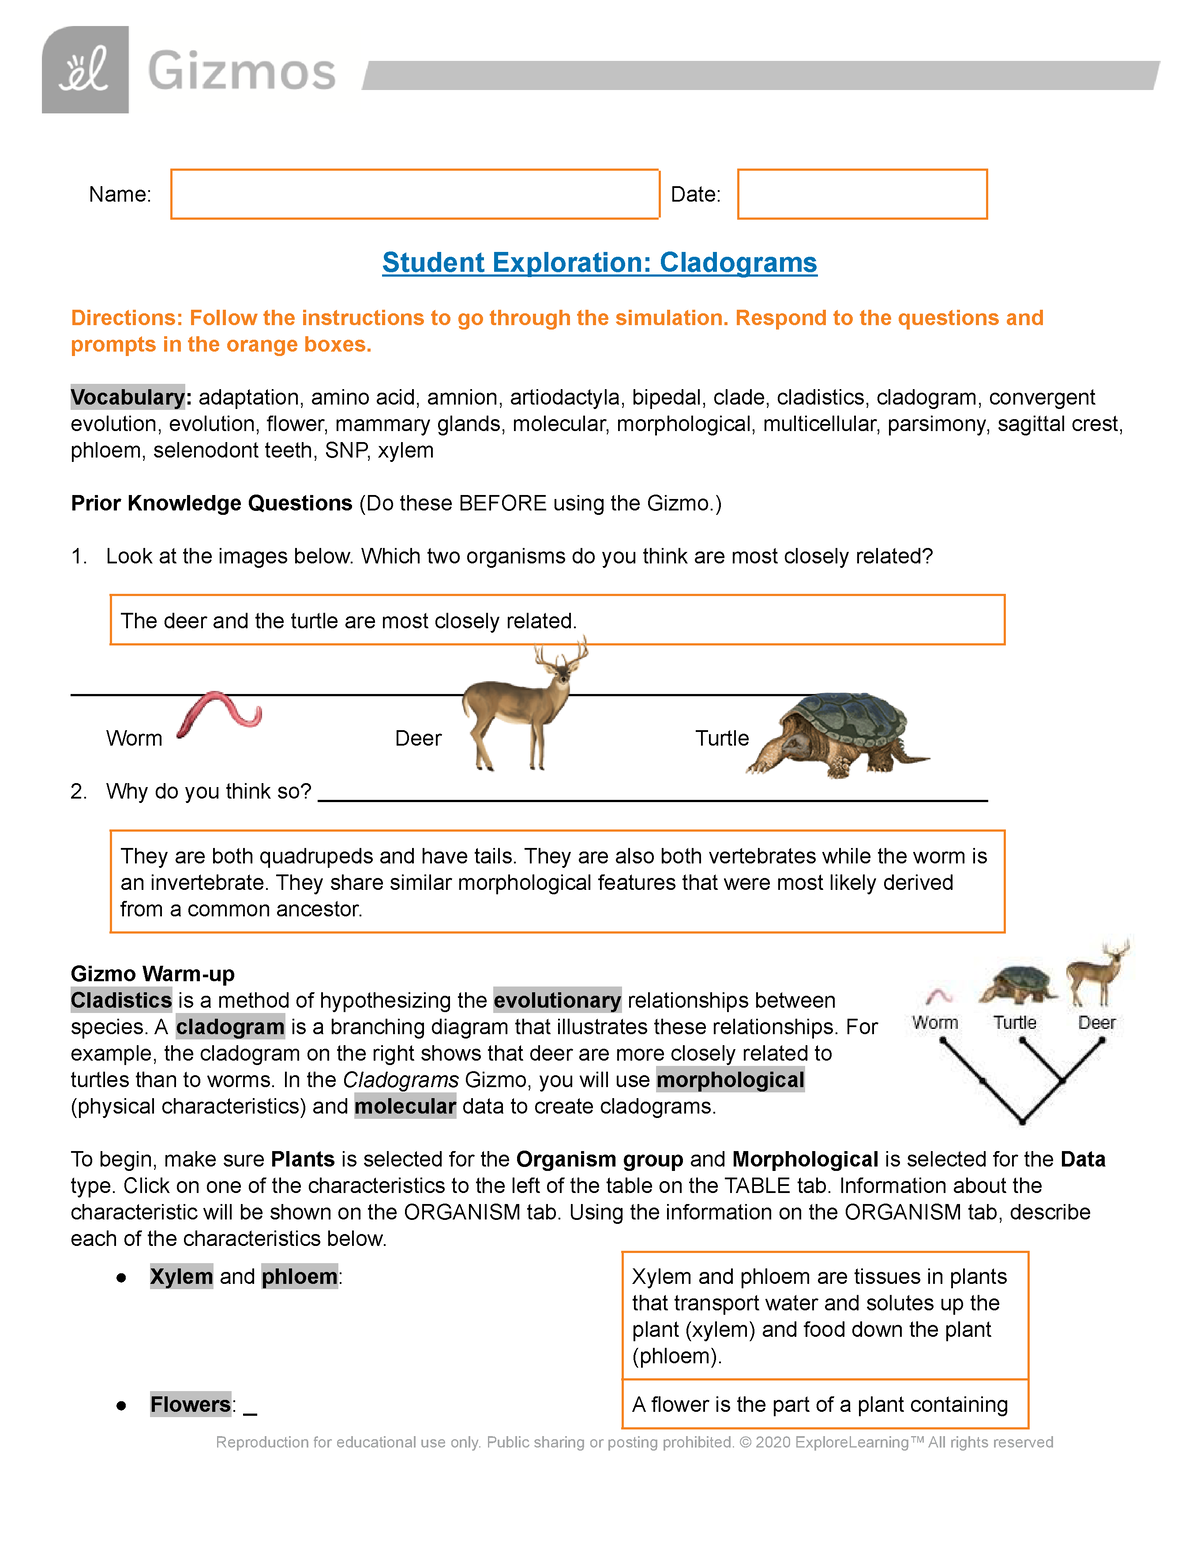 cladogram-gizmos-answers-semanario-worksheet-for-student